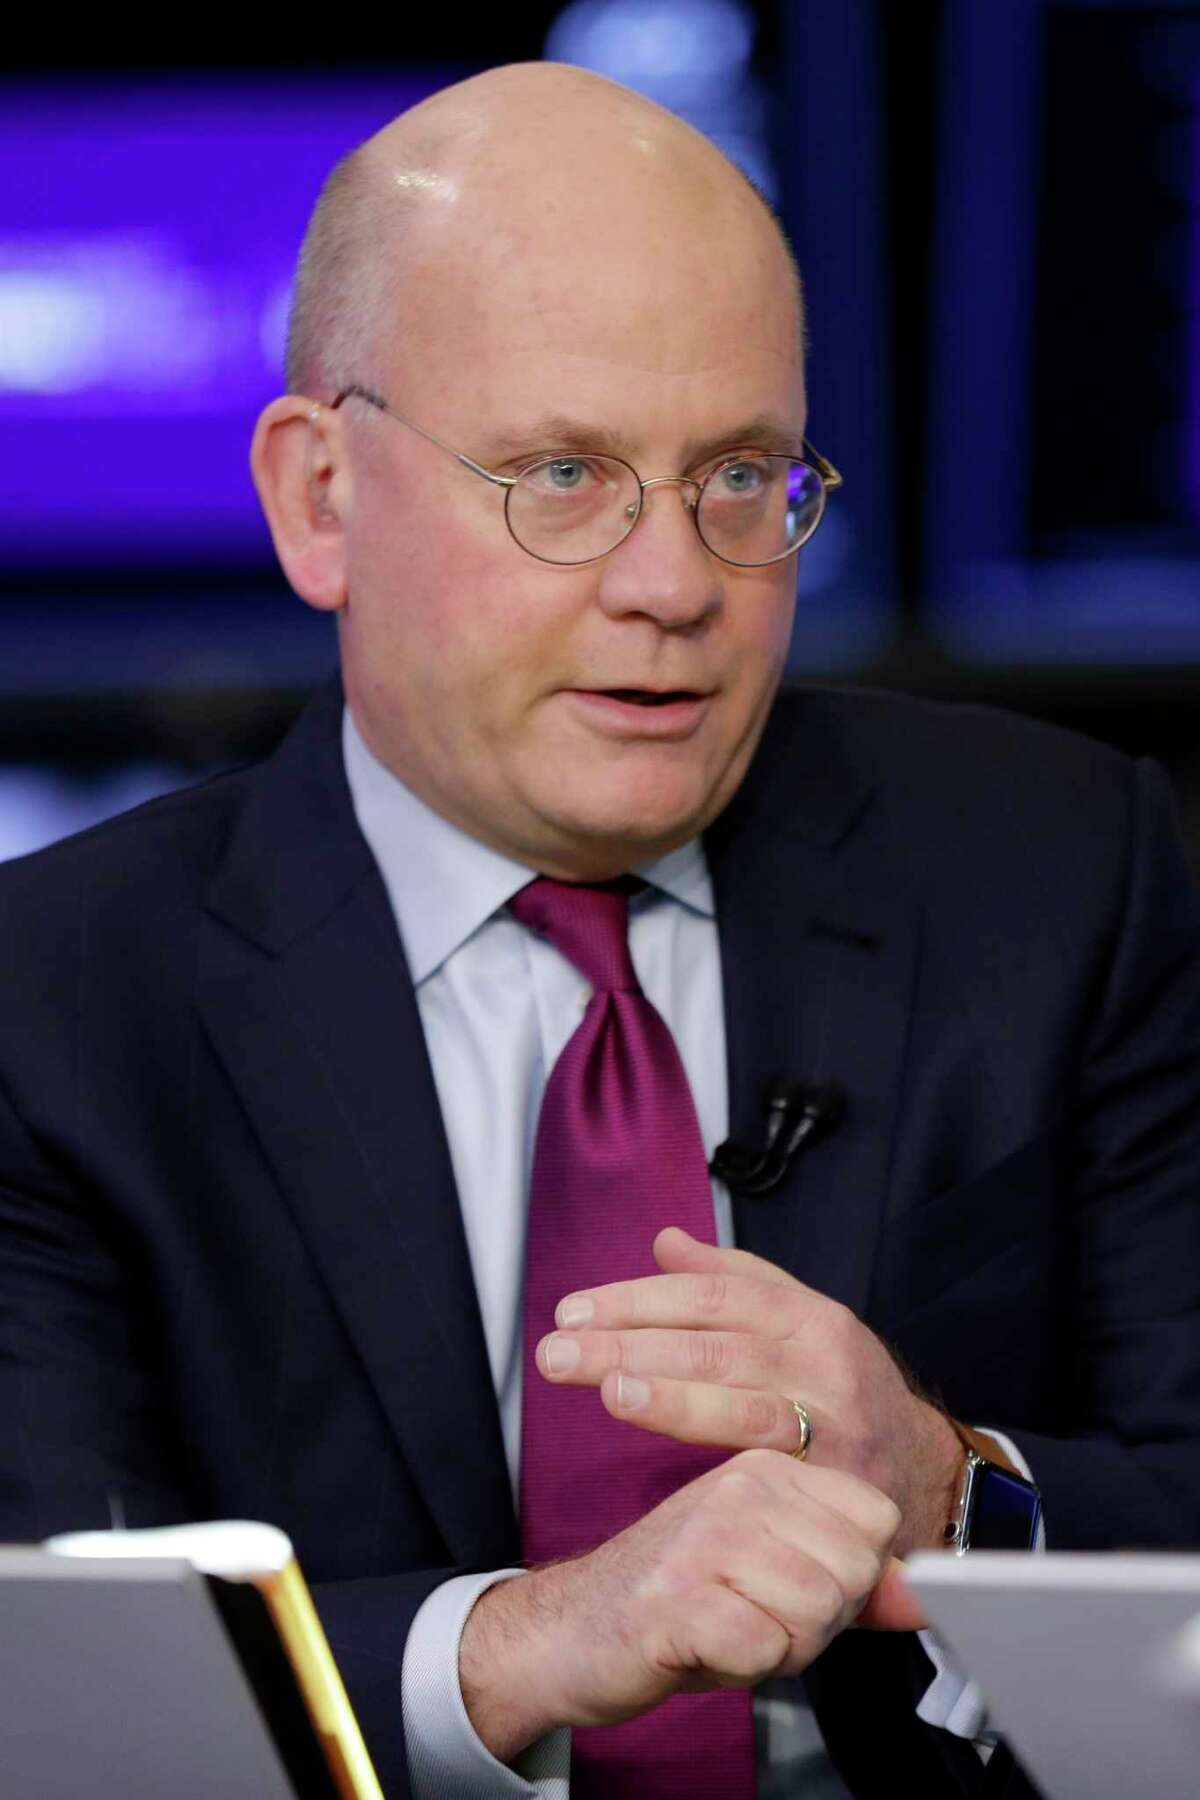 General Electric Chairman and CEO John Flannery is interviewed on the floor of the New York Stock Exchange, Tuesday, Nov. 14, 2017. (AP Photo/Richard Drew)